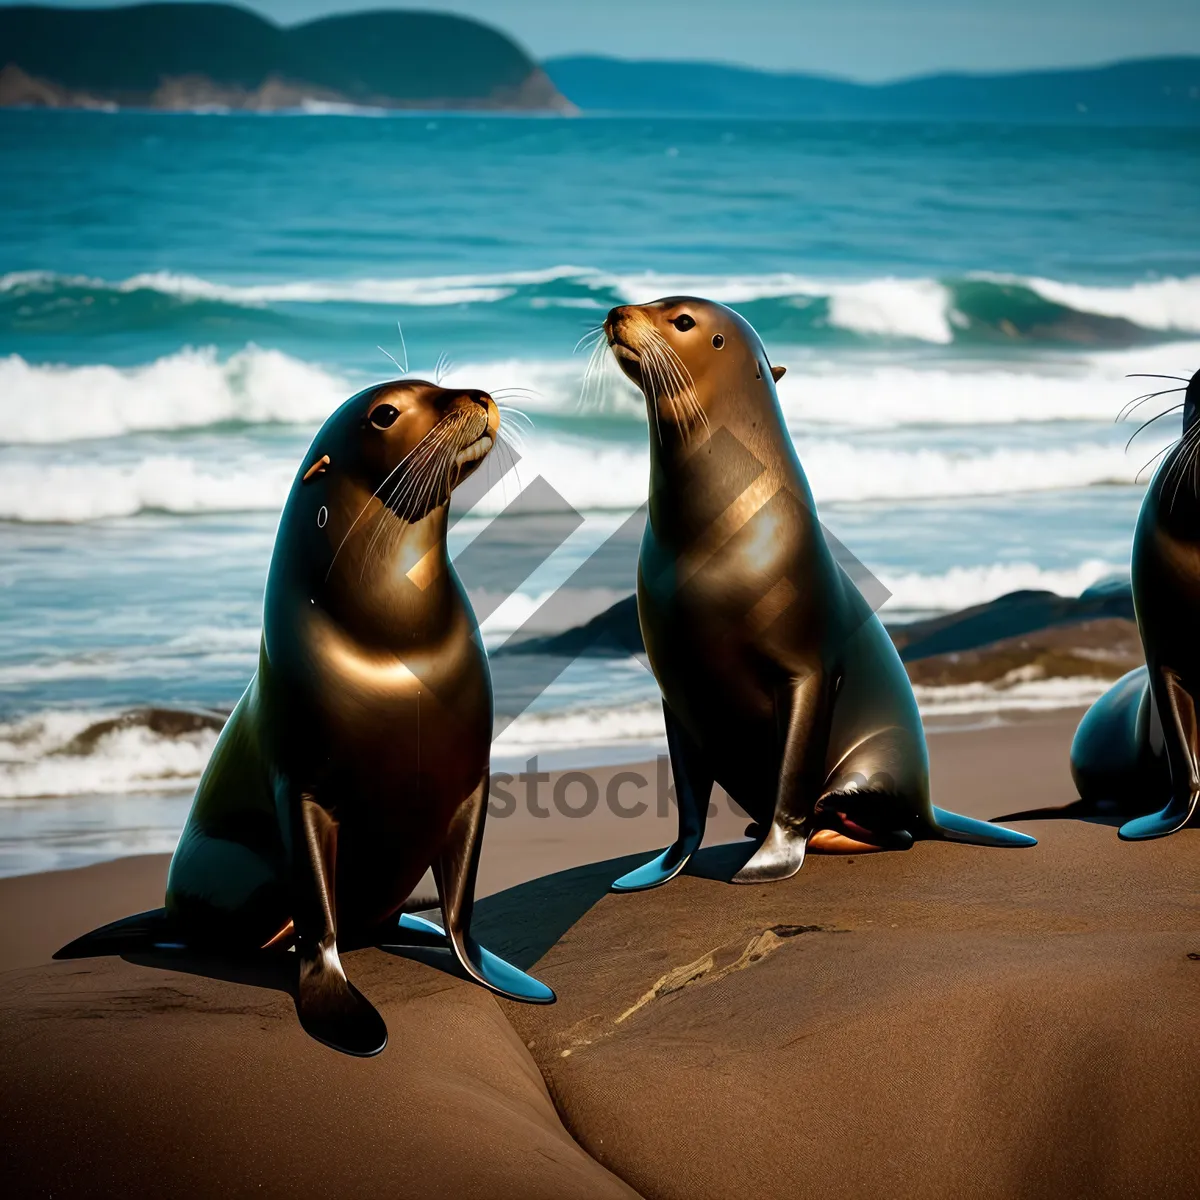 Picture of Sandy Sealion basks on picturesque coastal island